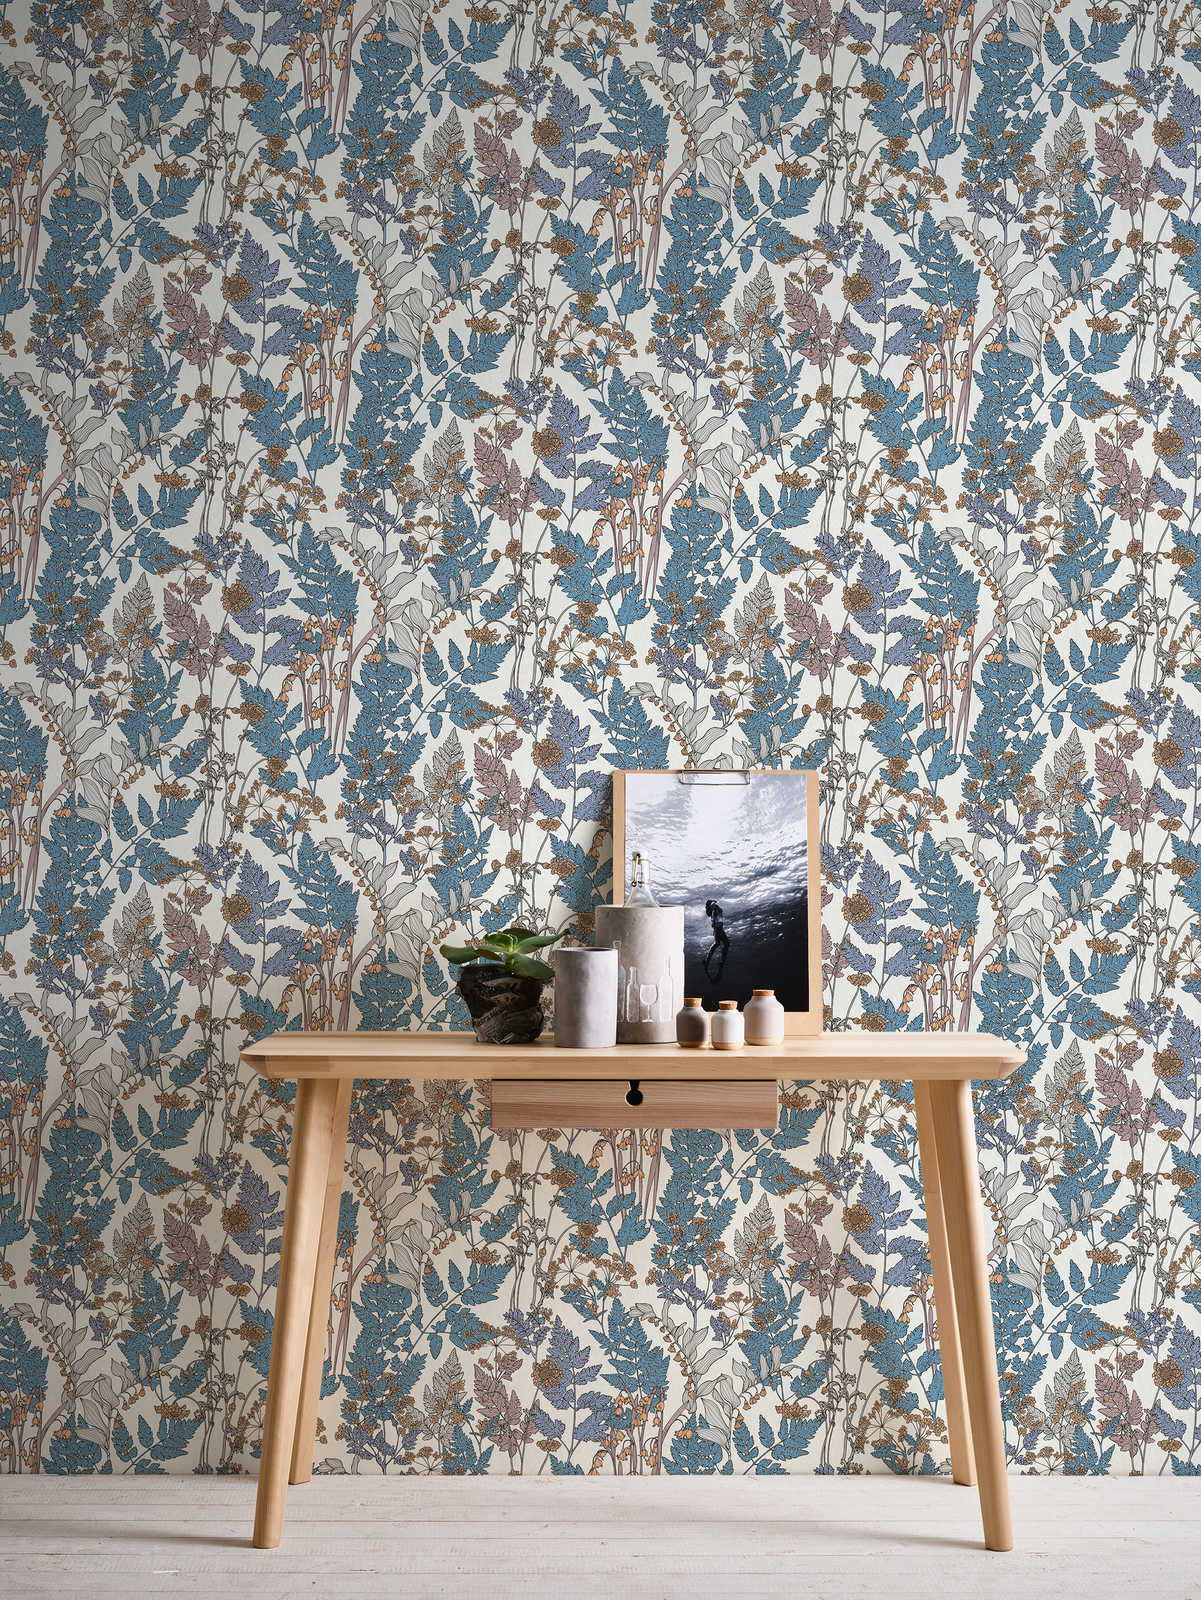             Nature wallpaper leaves & flowers in modern country style - blue, cream, beige
        